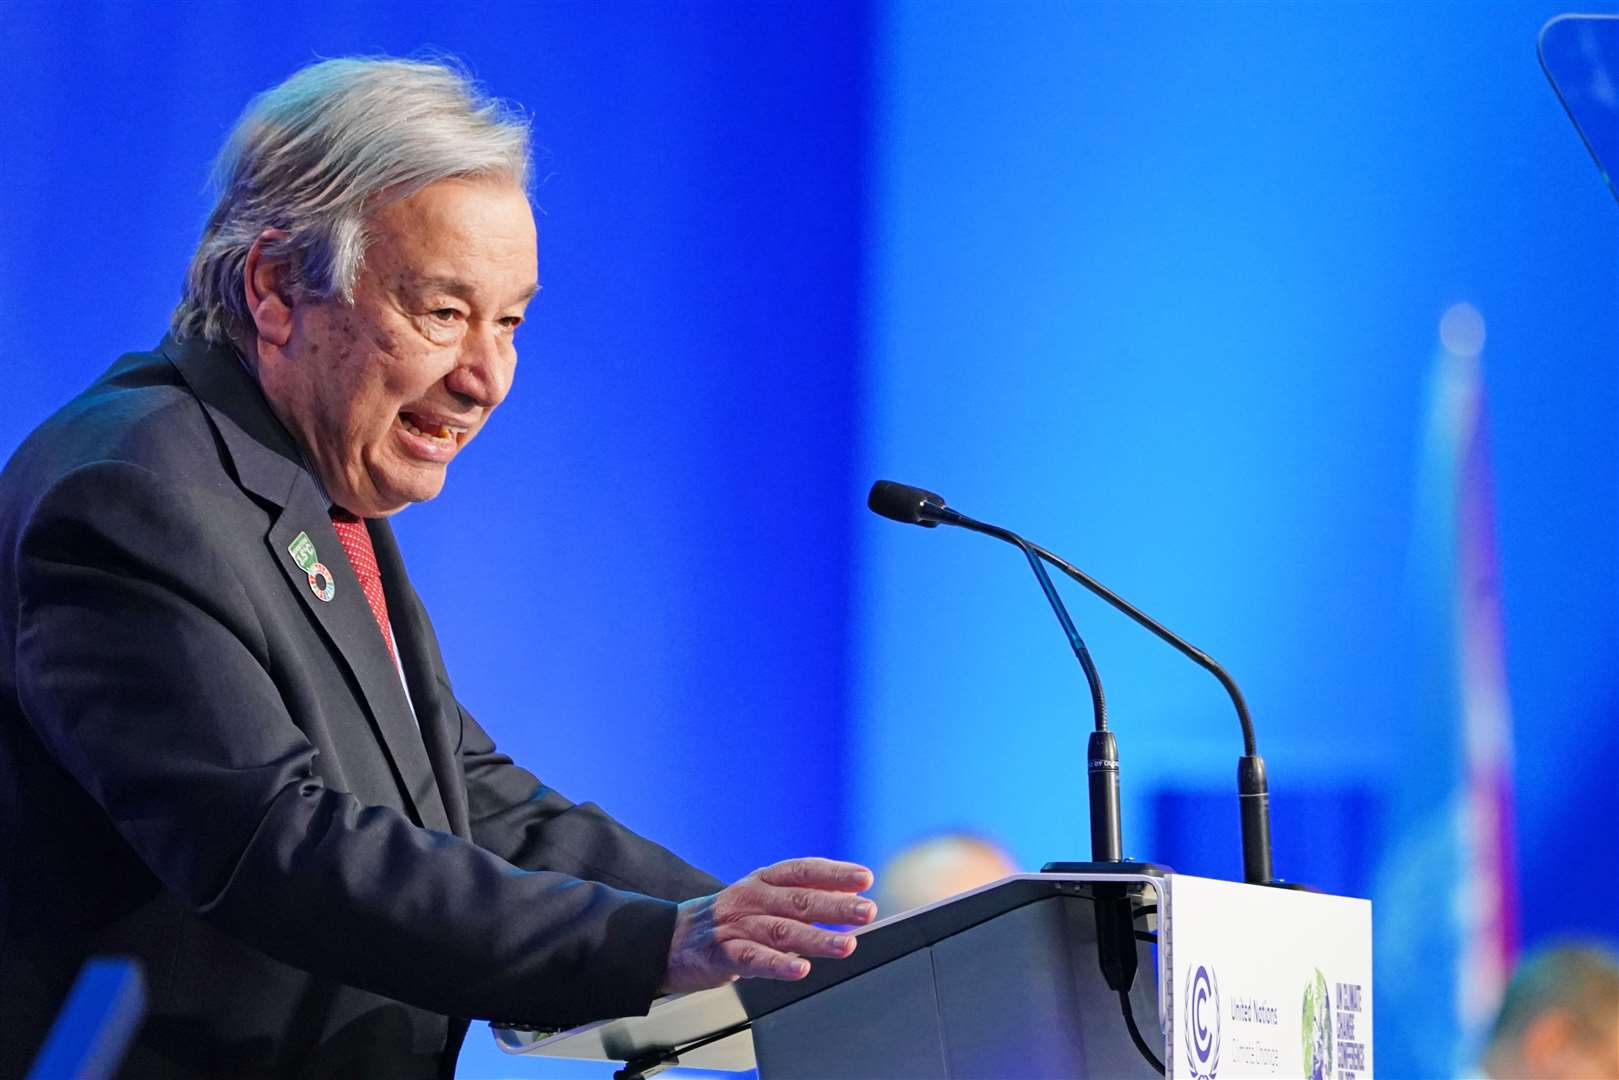 UN Secretary-General Antonio Guterres has warned that climate chaos will continue wrecking lives if the talks are not successful (Jane Barlow/PA)